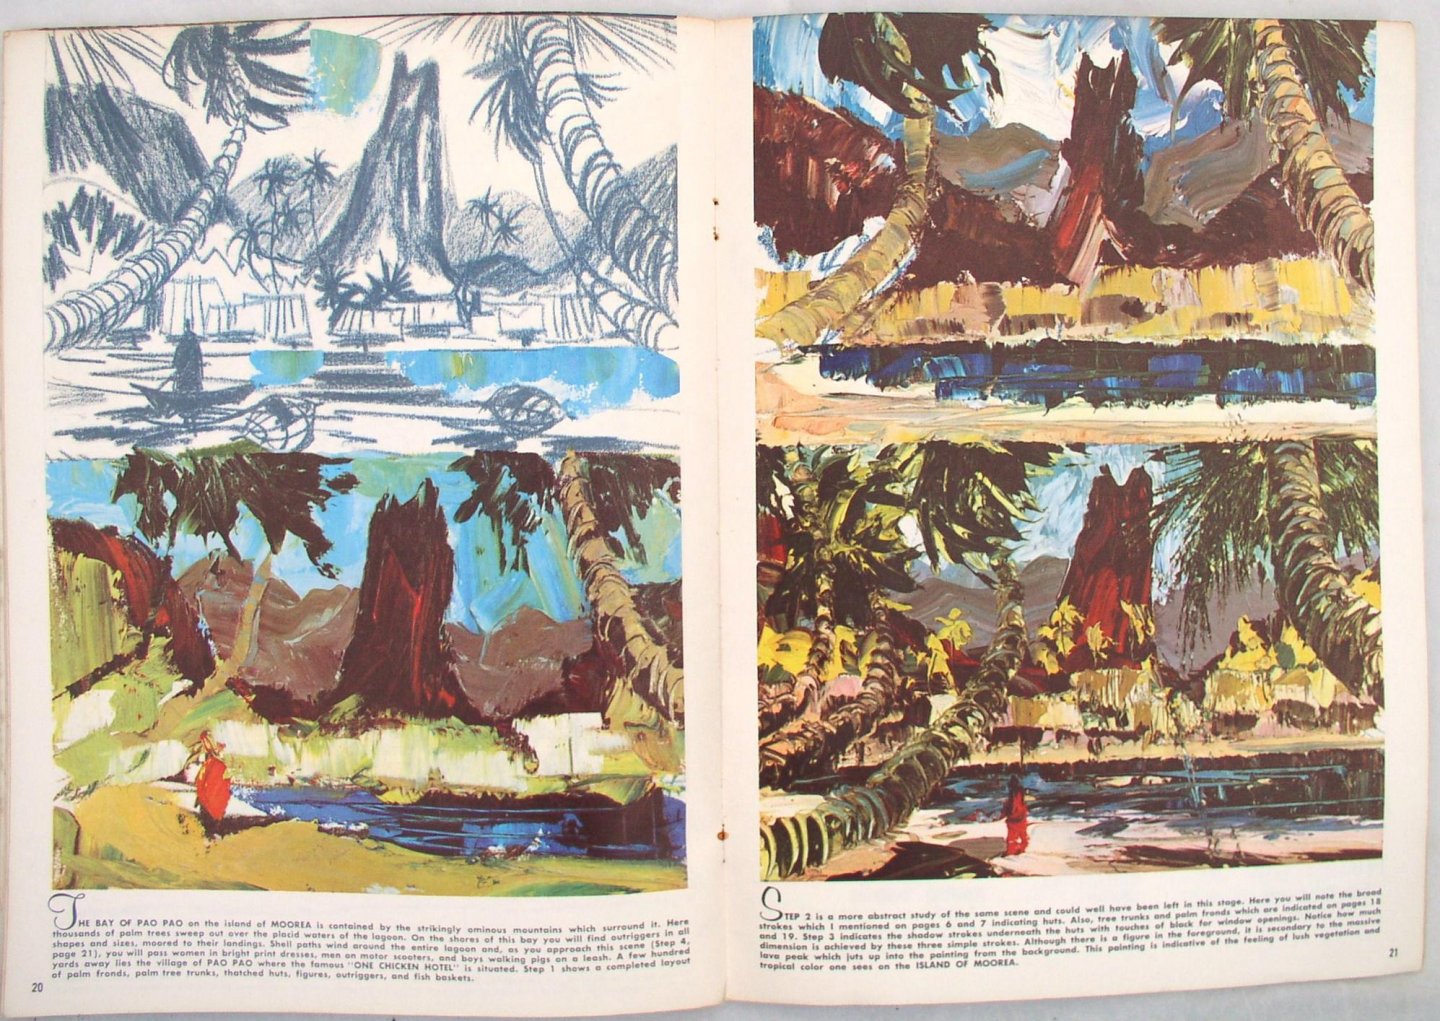 Henrie, Paul Blaine - PAINTING IN THE SOUTH SEAS (WALTER T. FOSTER "HOW TO DRAW" BOOK, 88)